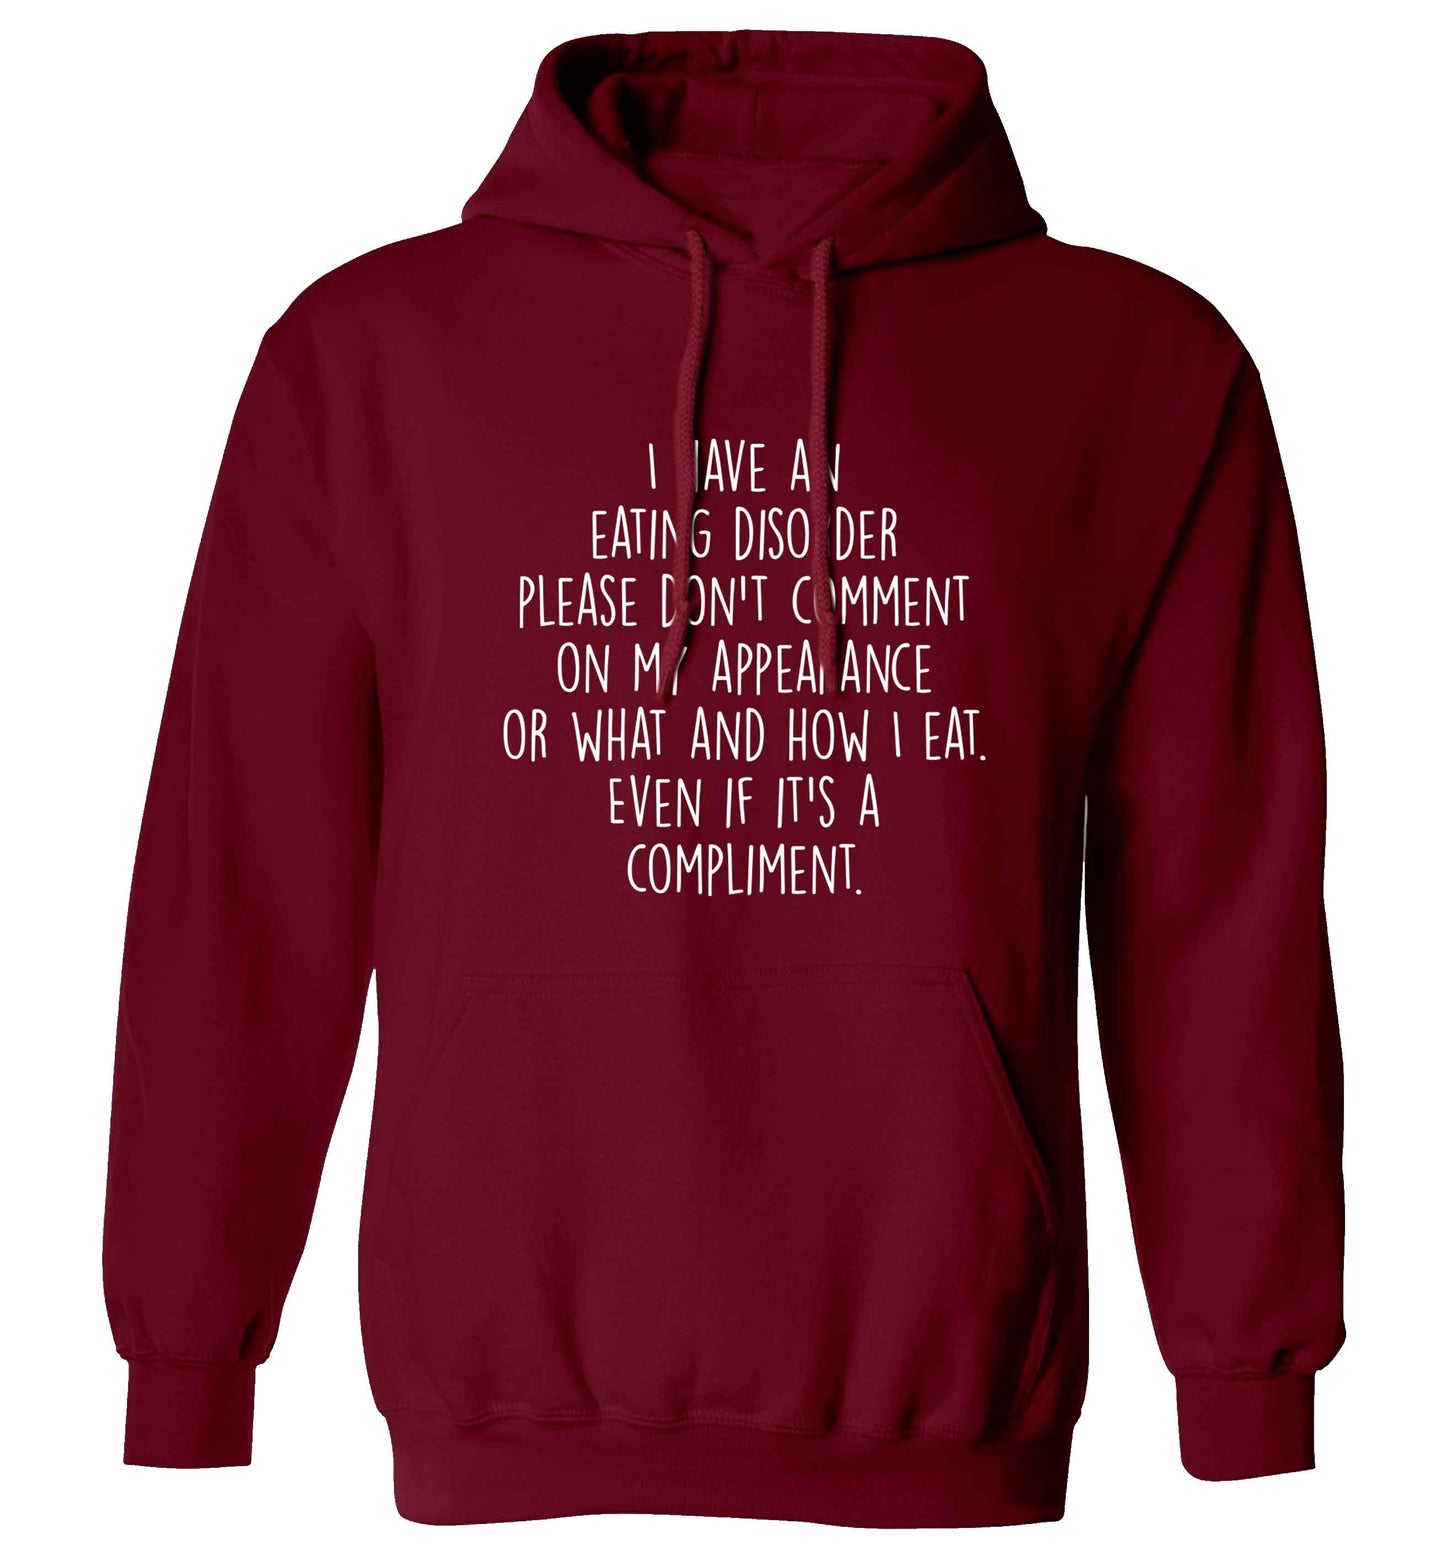 I have an eating disorder please don't comment on my appearance or what and how I eat. Even if it's a compliment adults unisex maroon hoodie 2XL